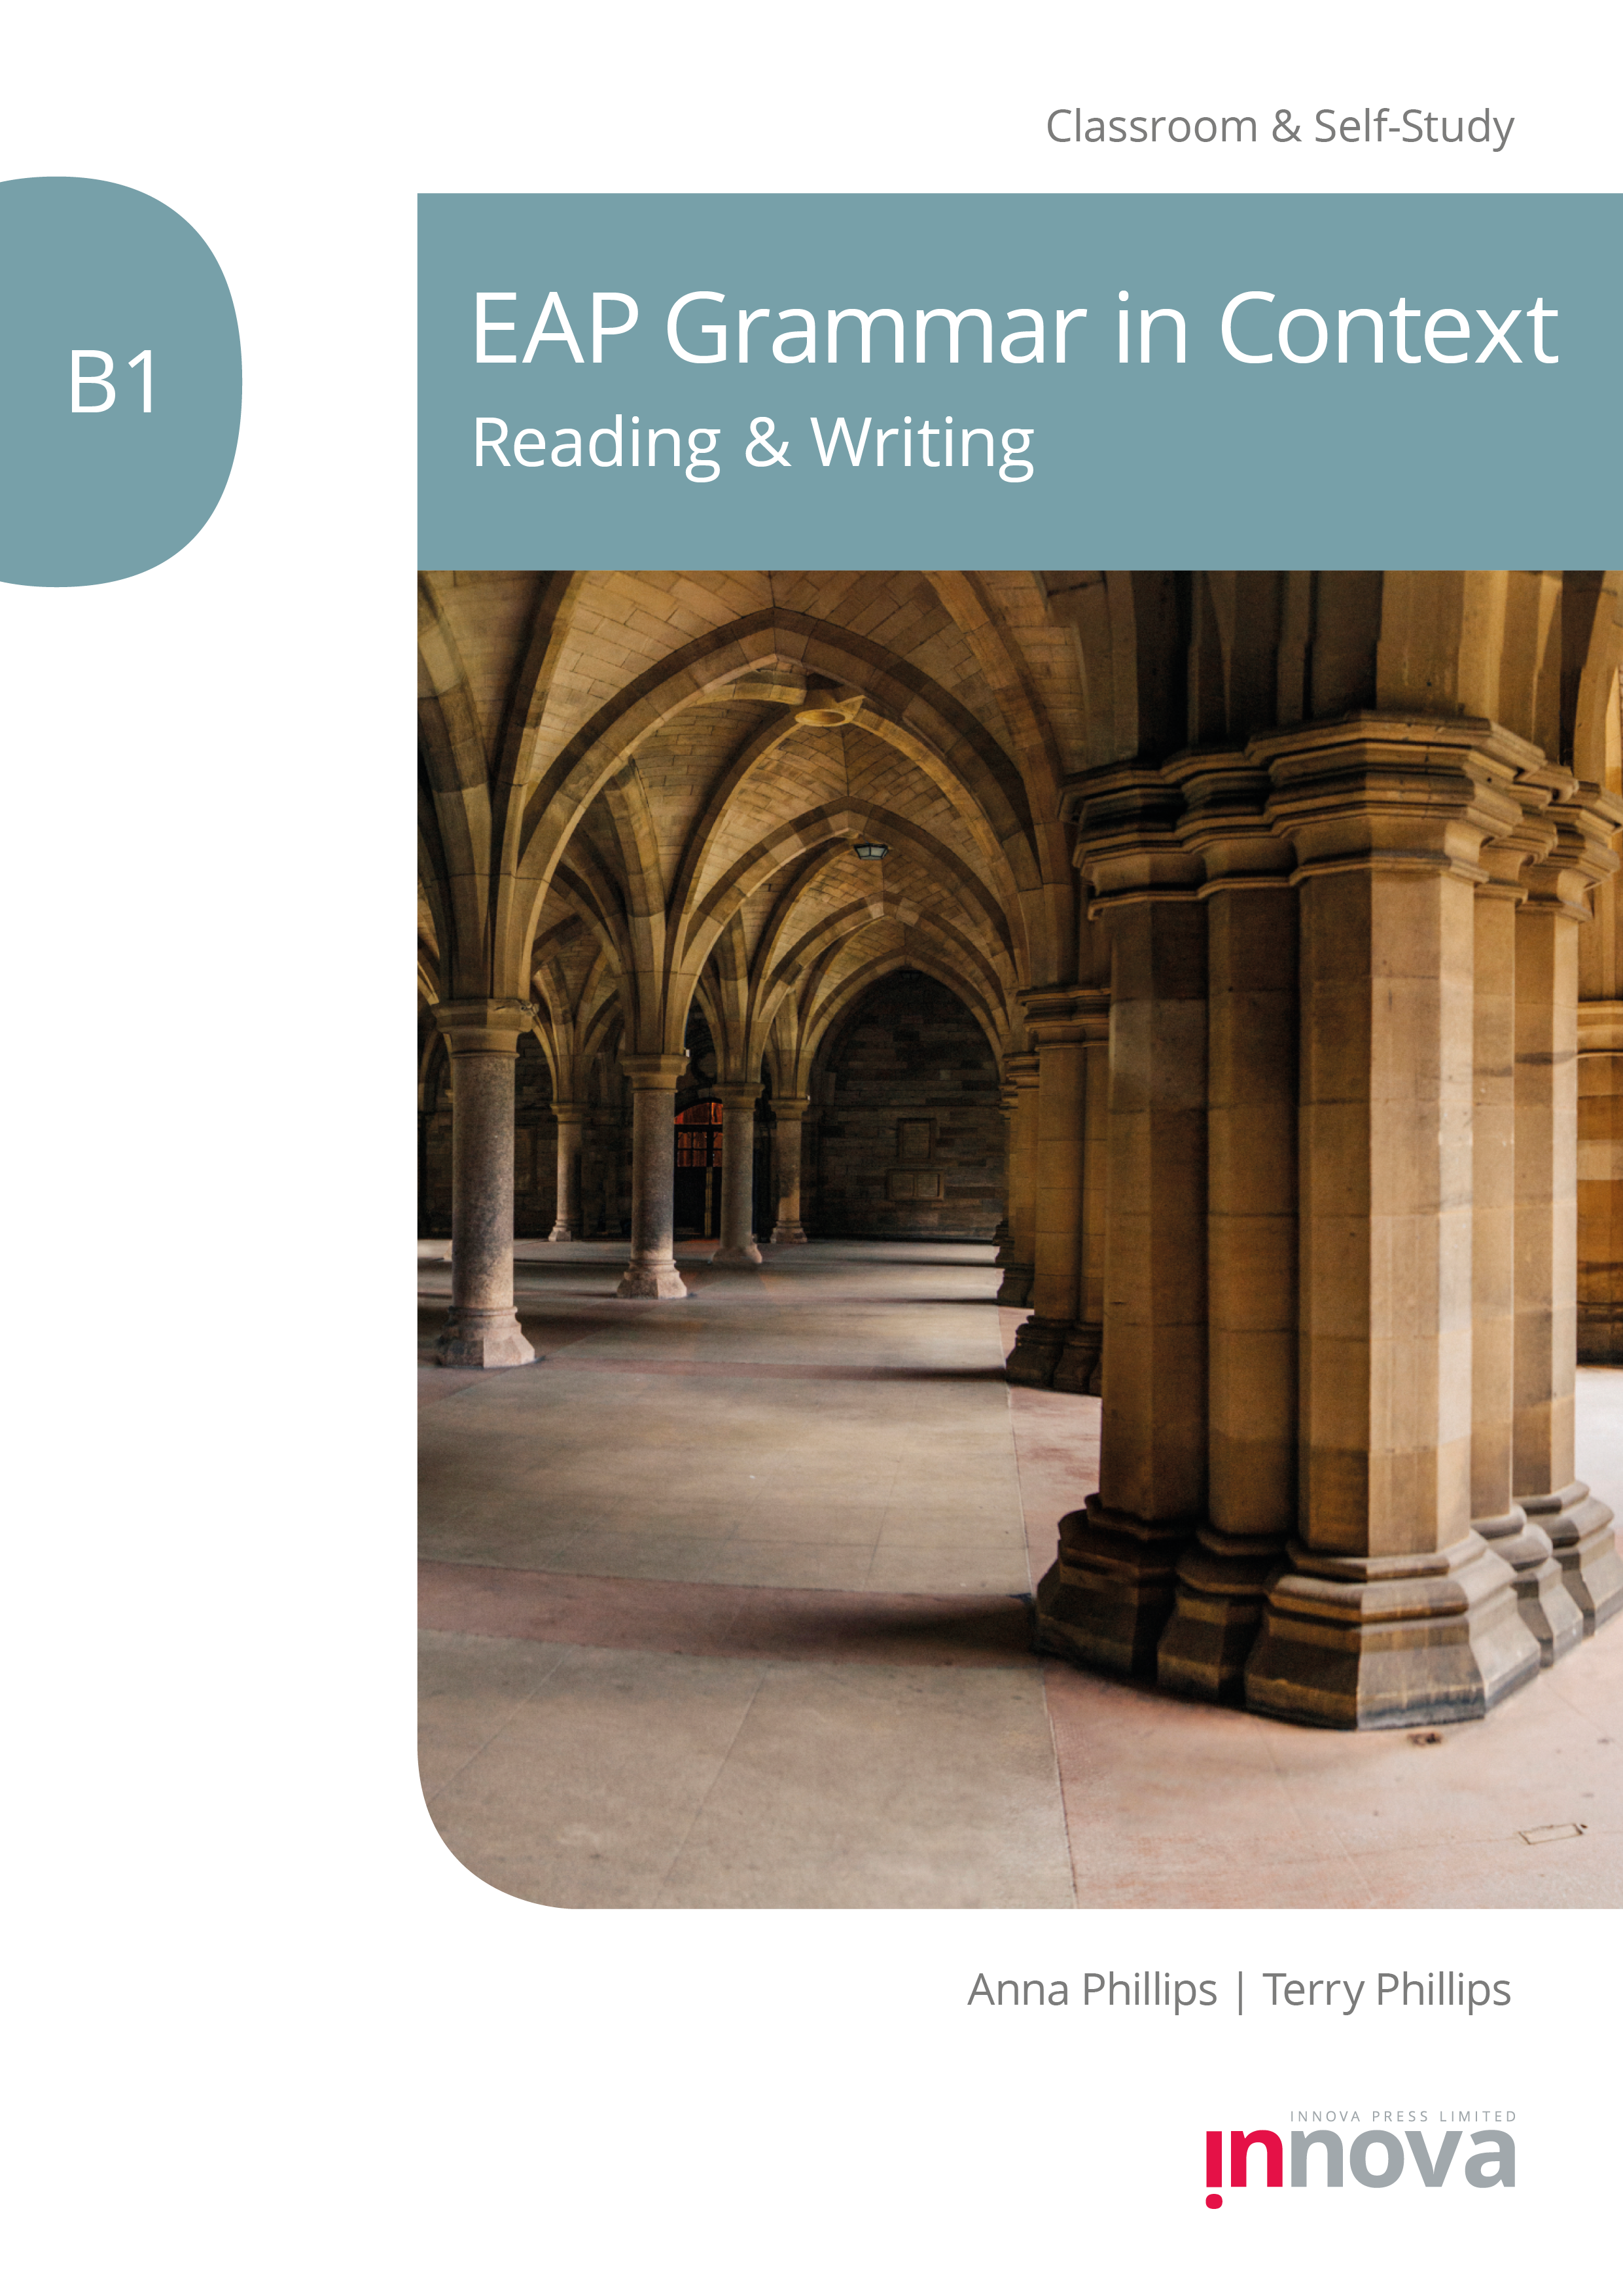 Front cover for EAP Grammar in Context B1: Reading & Writing published by Innova Press, interior of stone archways